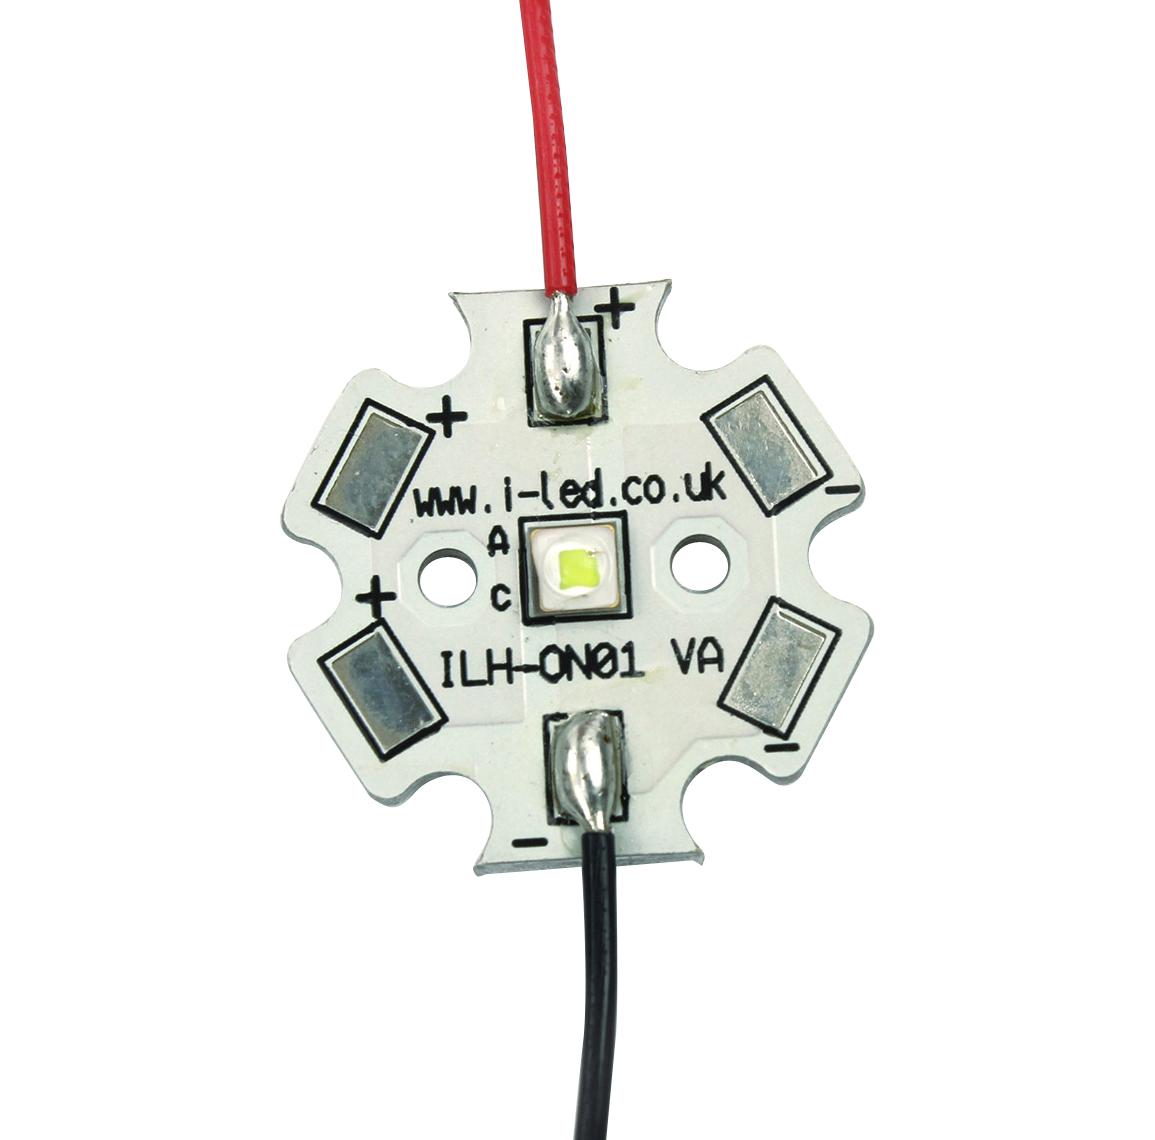 Intelligent Led Solutions Ilh-Ow01-Ulwh-Sc211-Wir200. Led Mod, Ultra Wht, 6500K, 130Lm, 0.99W